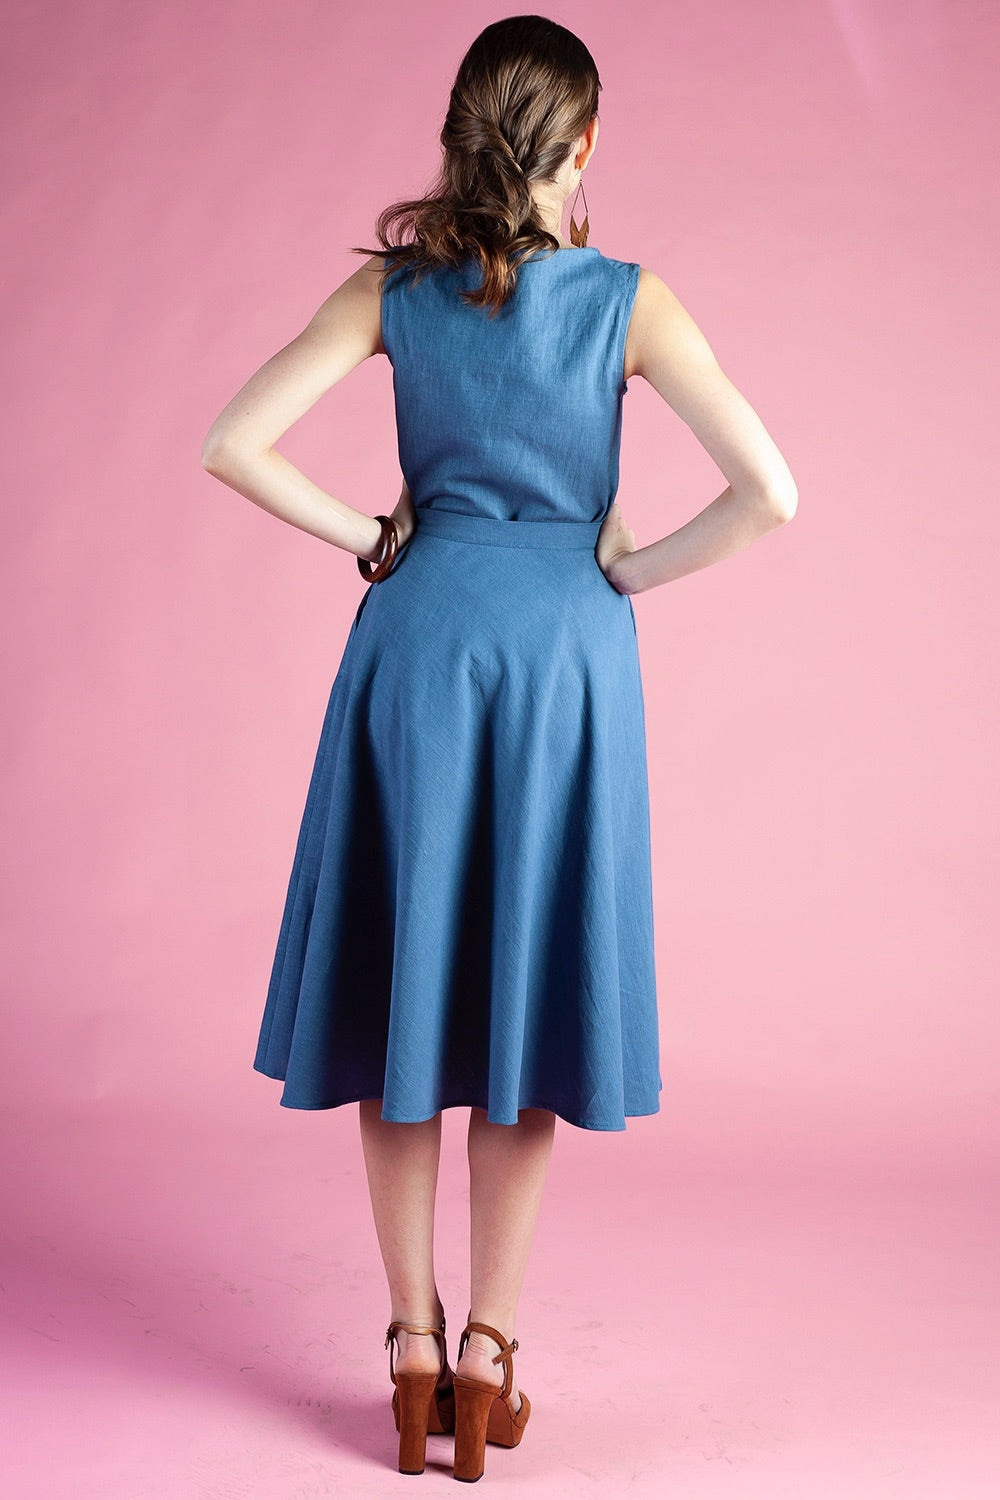 Blue grey linen circle skirts with side pockets